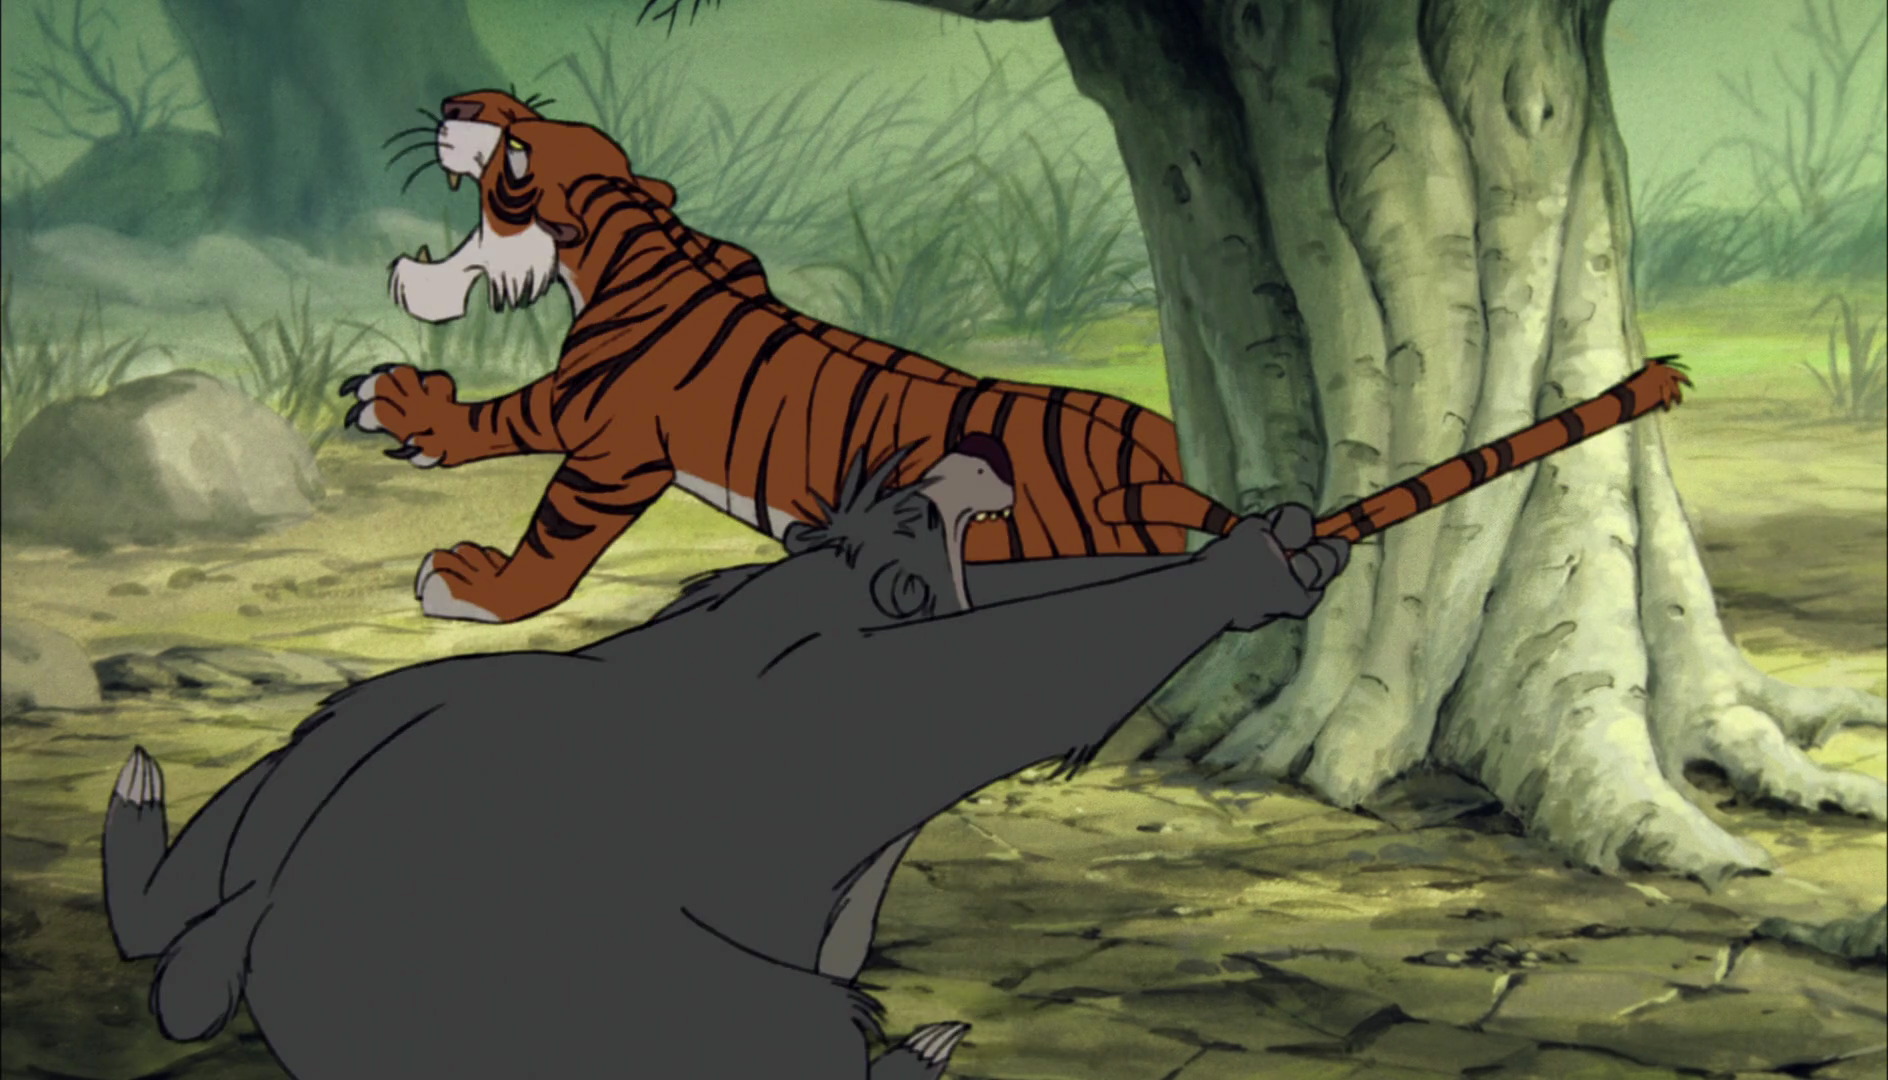 Baloo the Bear and Shere Khan the Tiger got caught by a tree